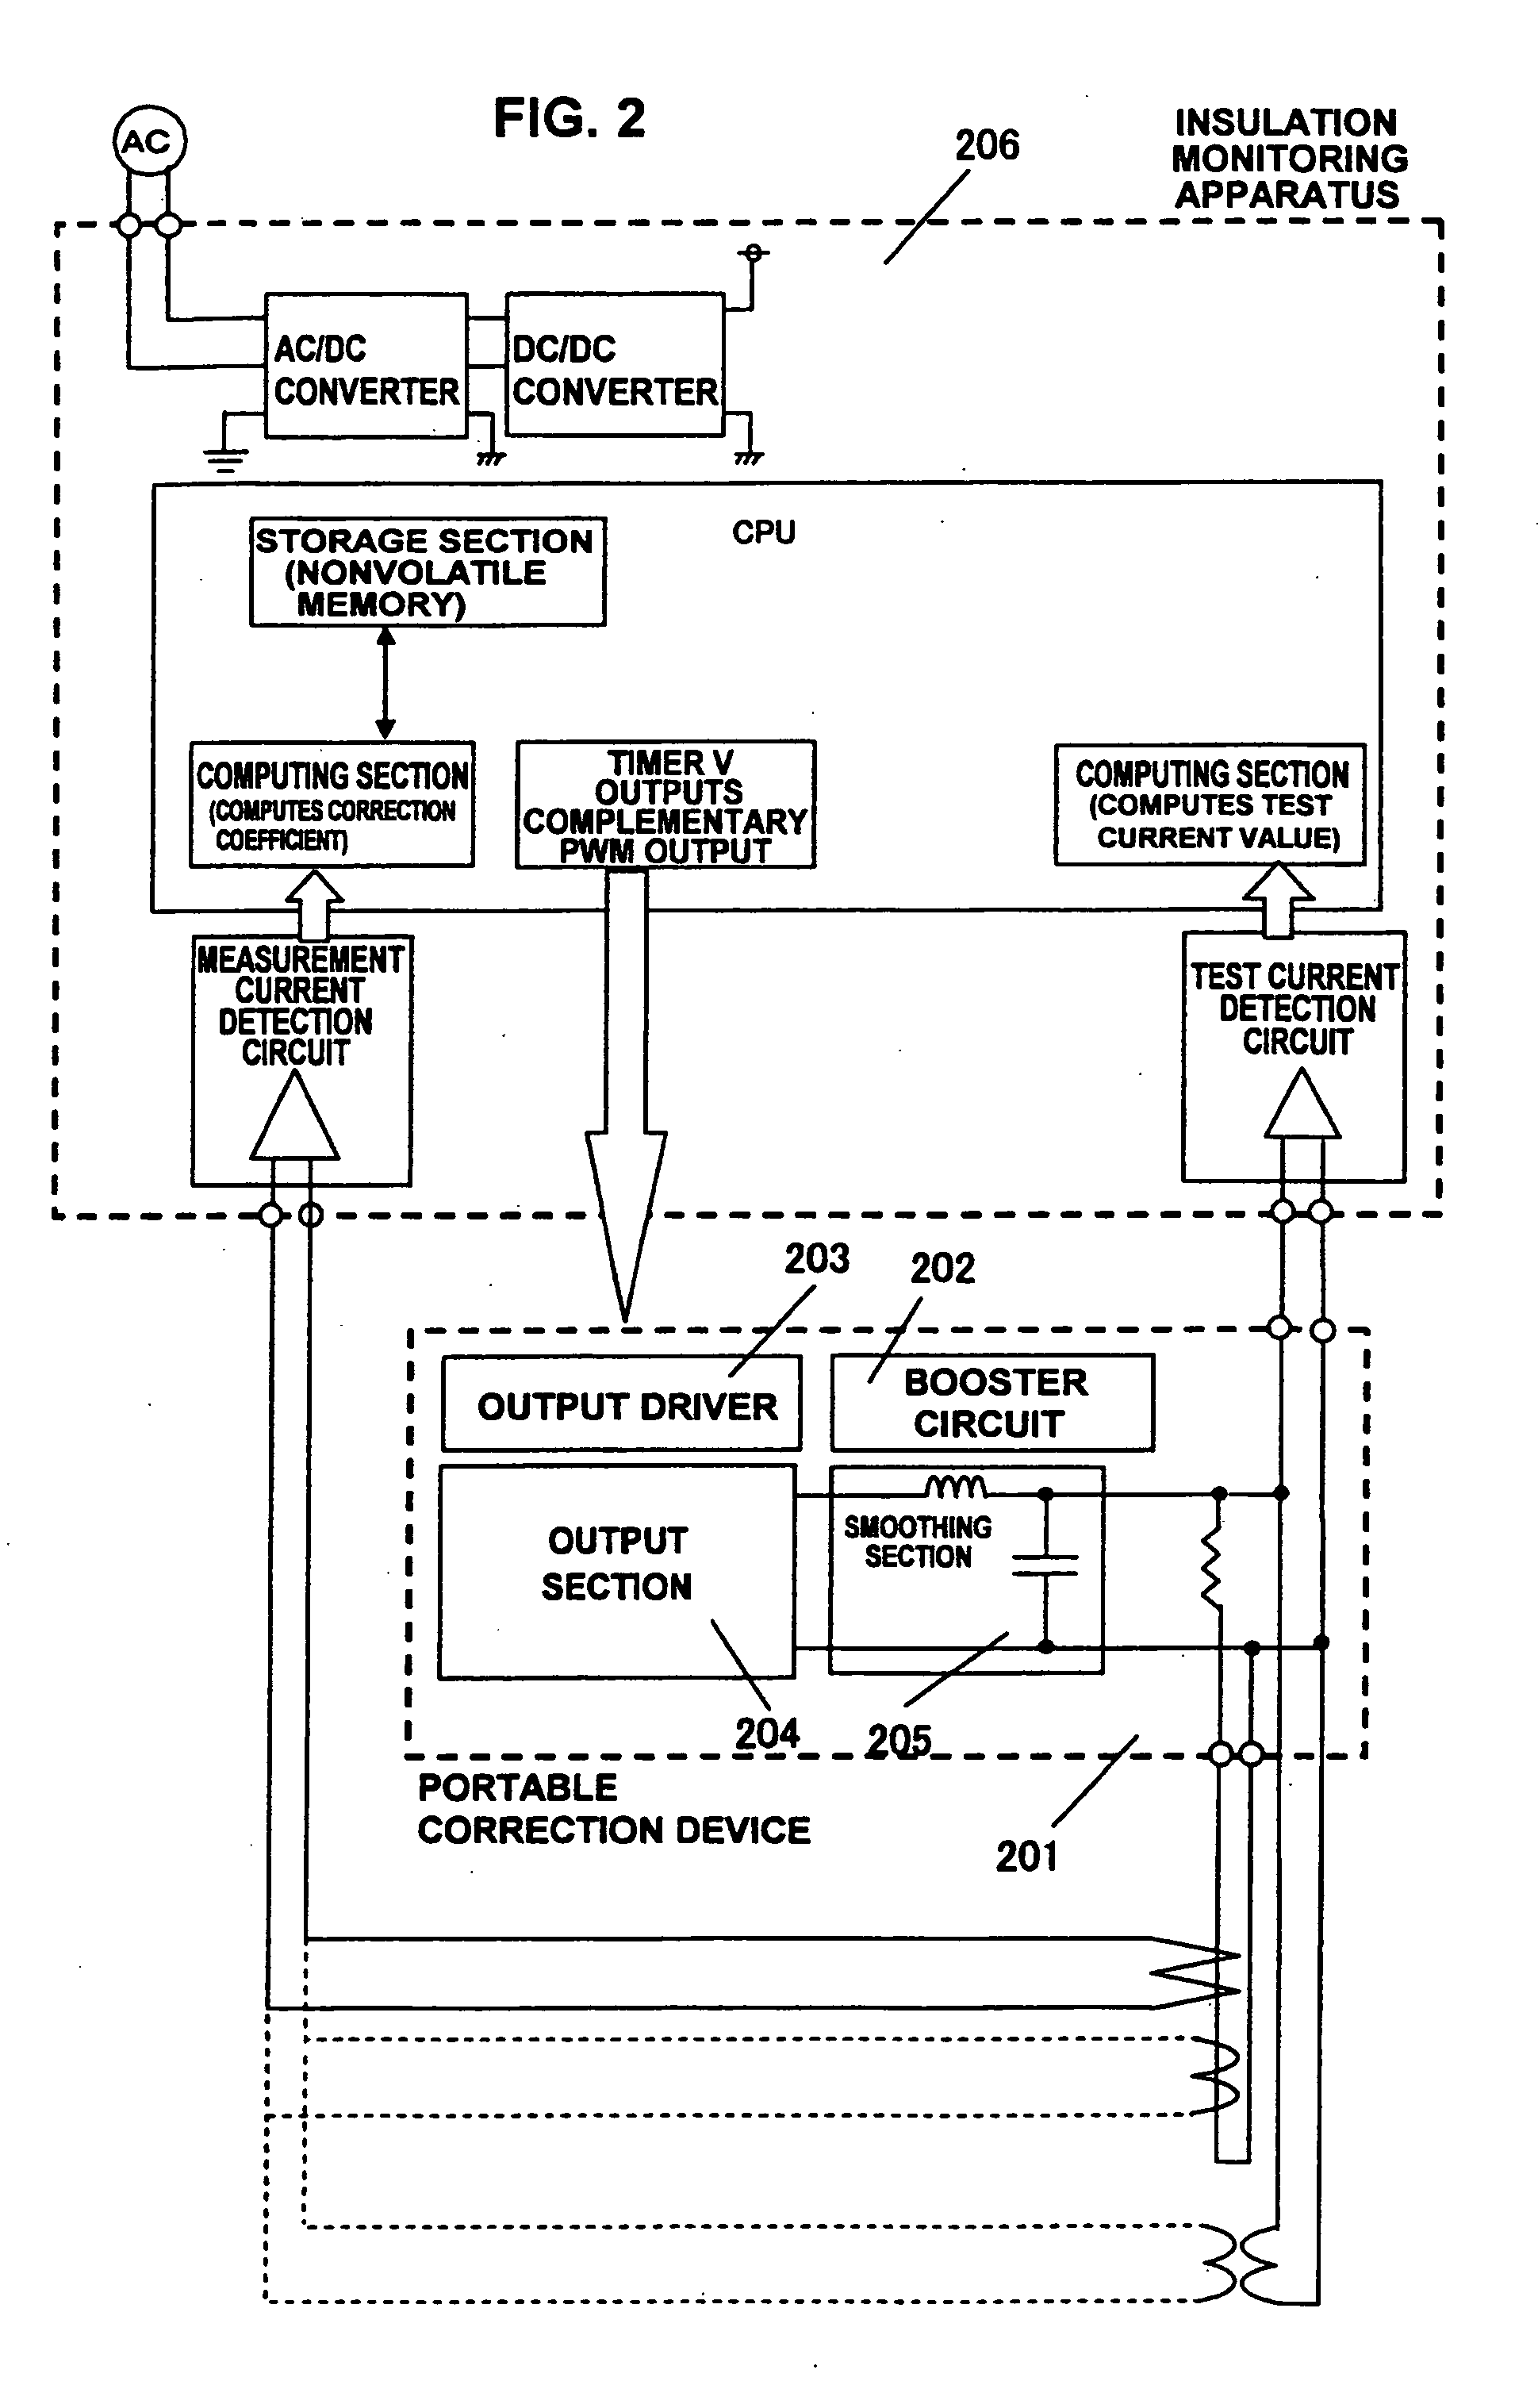 Property monitoring apparatus for current transformer or electric transformer